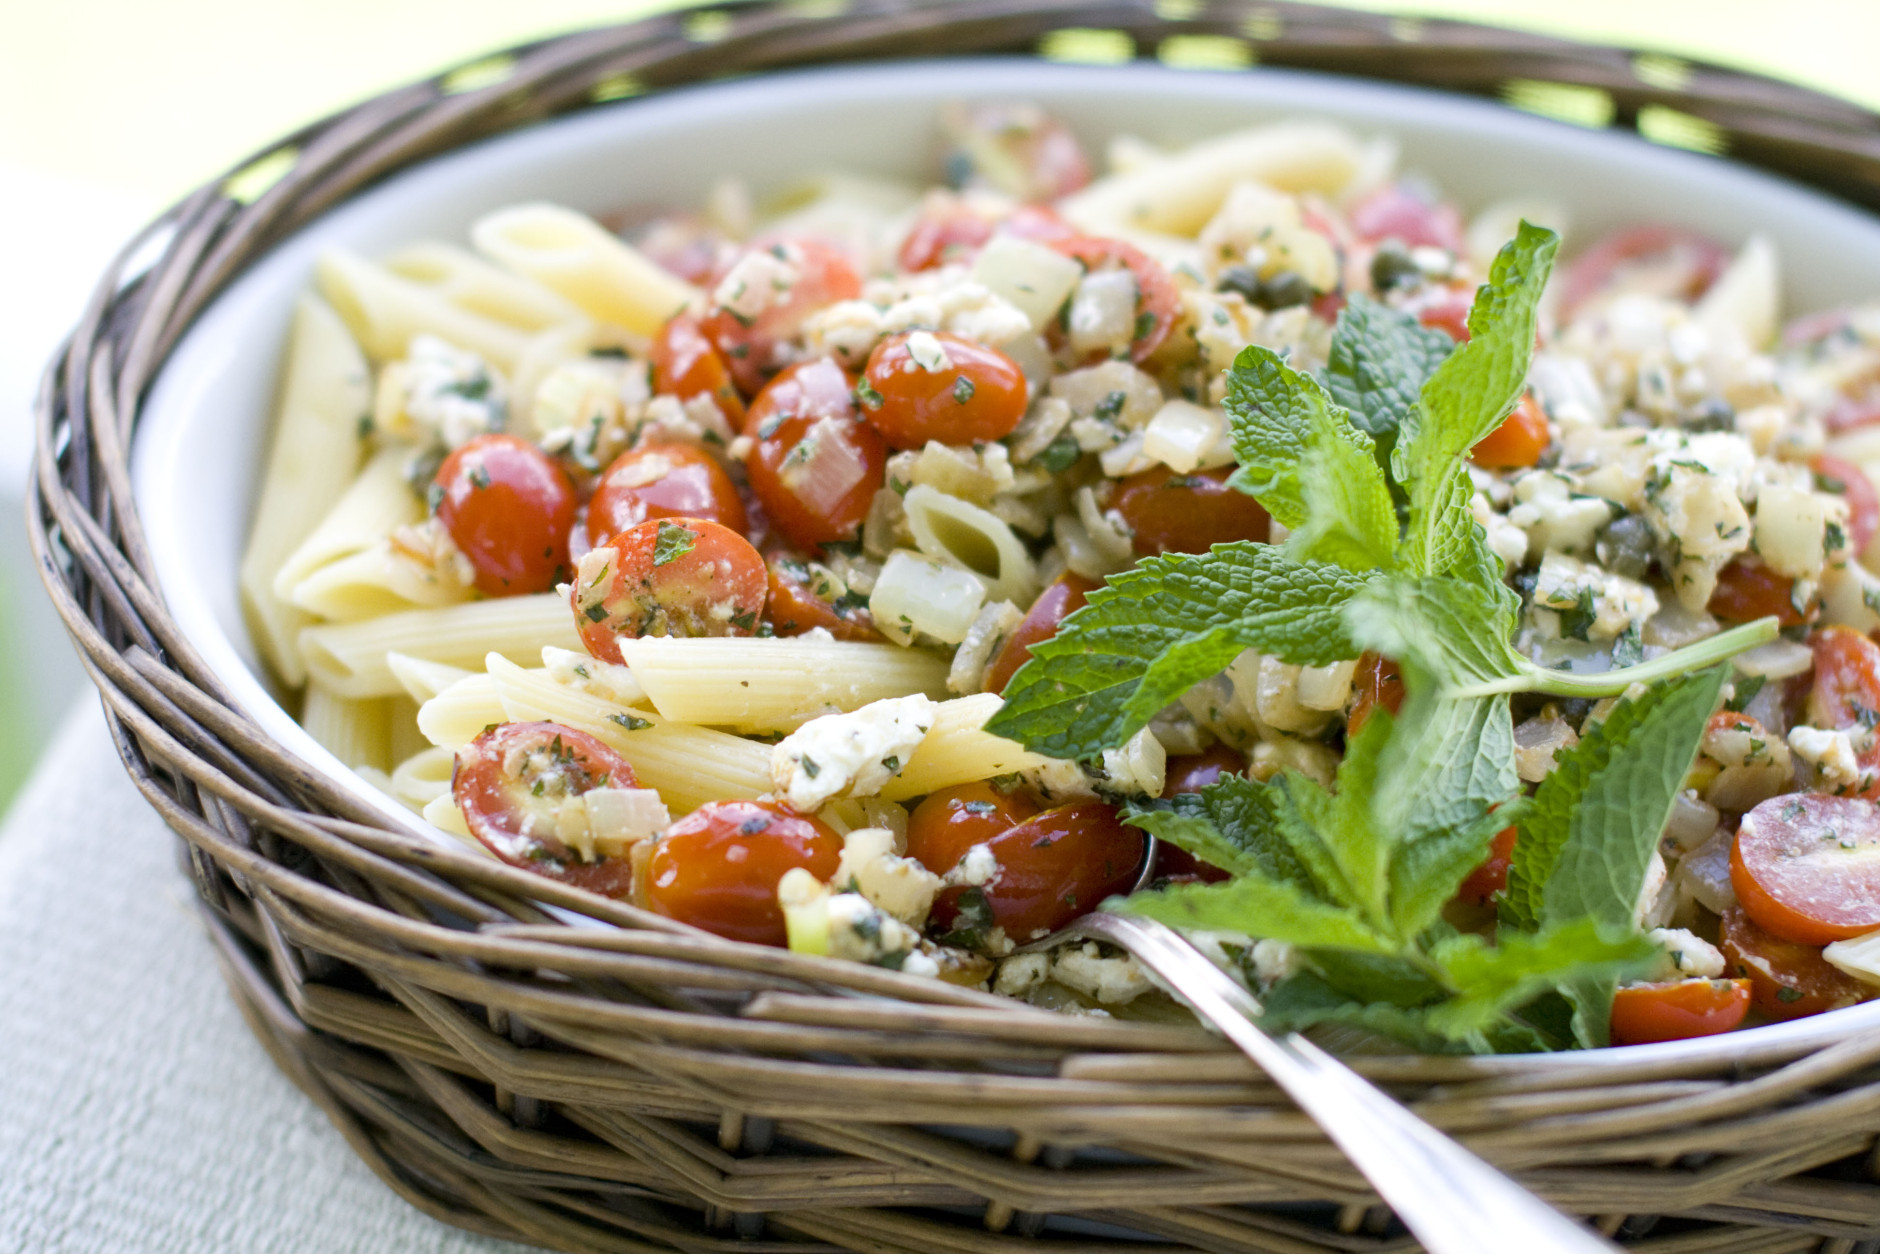 In this May 25, 2011 image taken in Concord, N.H., a dish of feta-mint penne with tomatoes and capers is shown. Many people dont realize that fresh mint has a savory side. It adds tons of fresh, peppery flavor. (AP Photo/Matthew Mead)